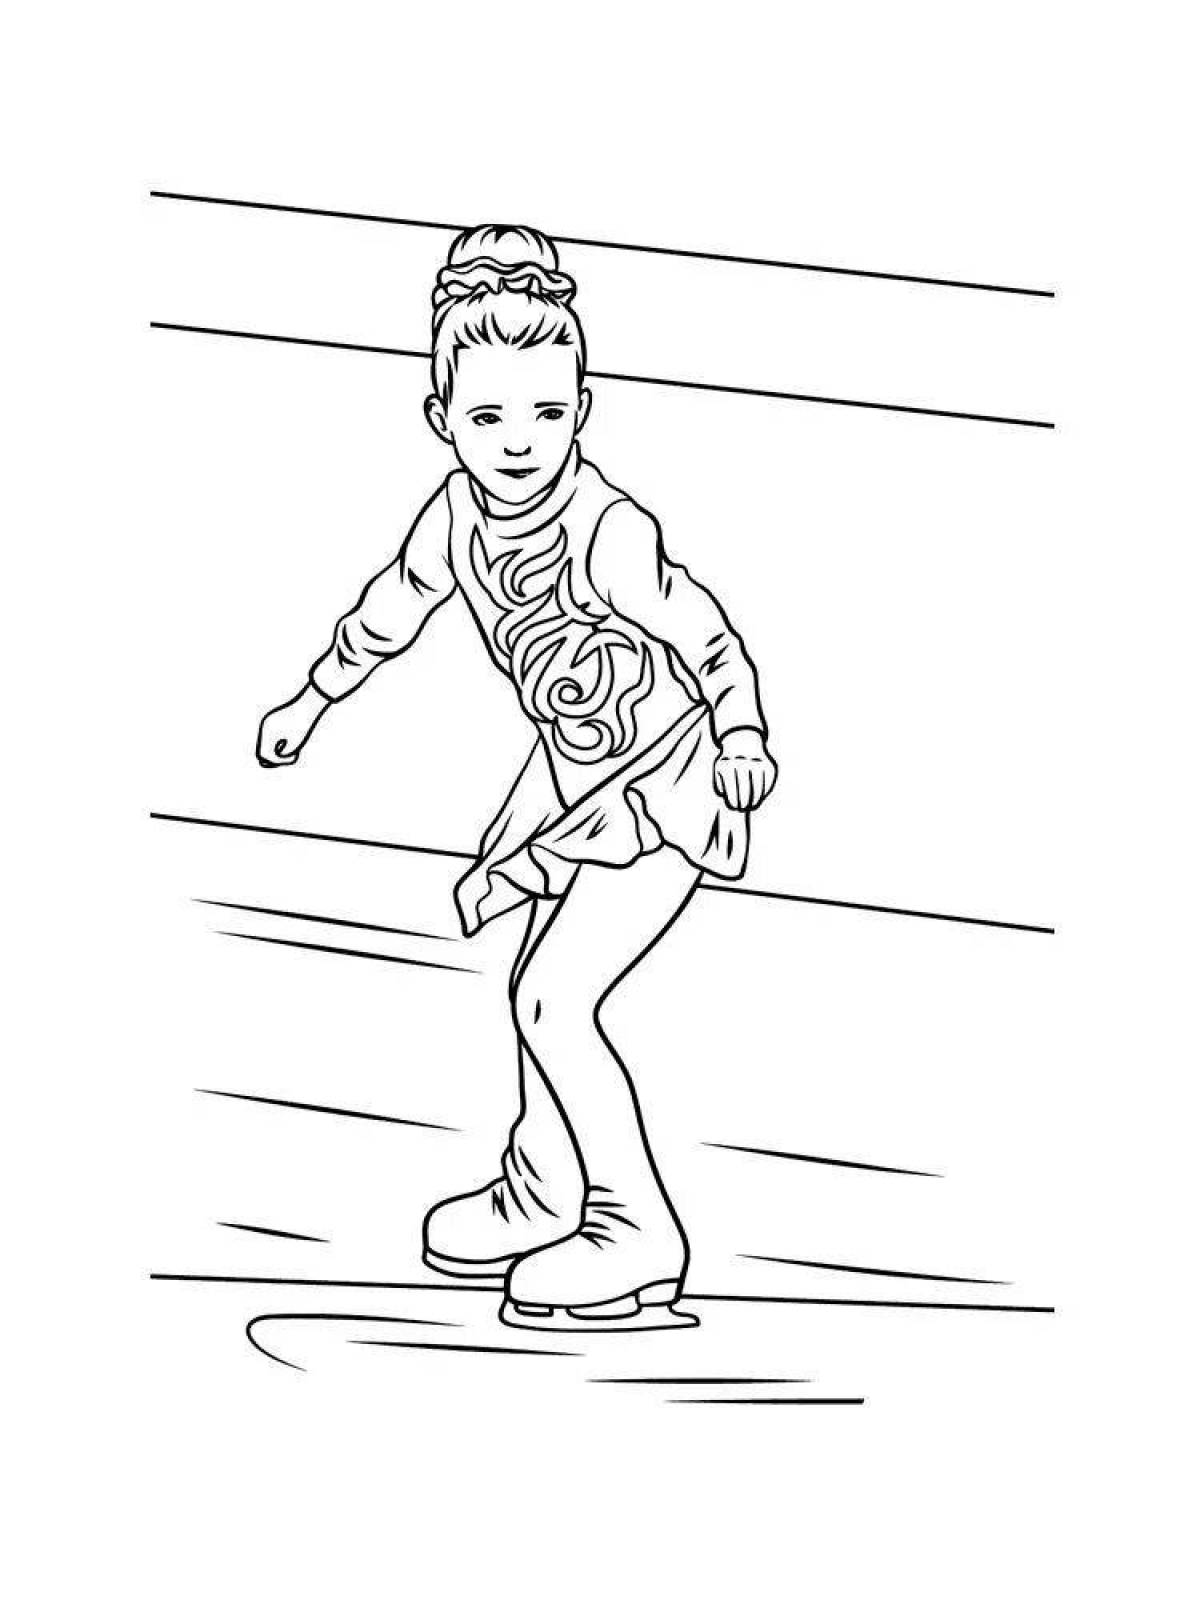 Bright figure skater coloring book for kids